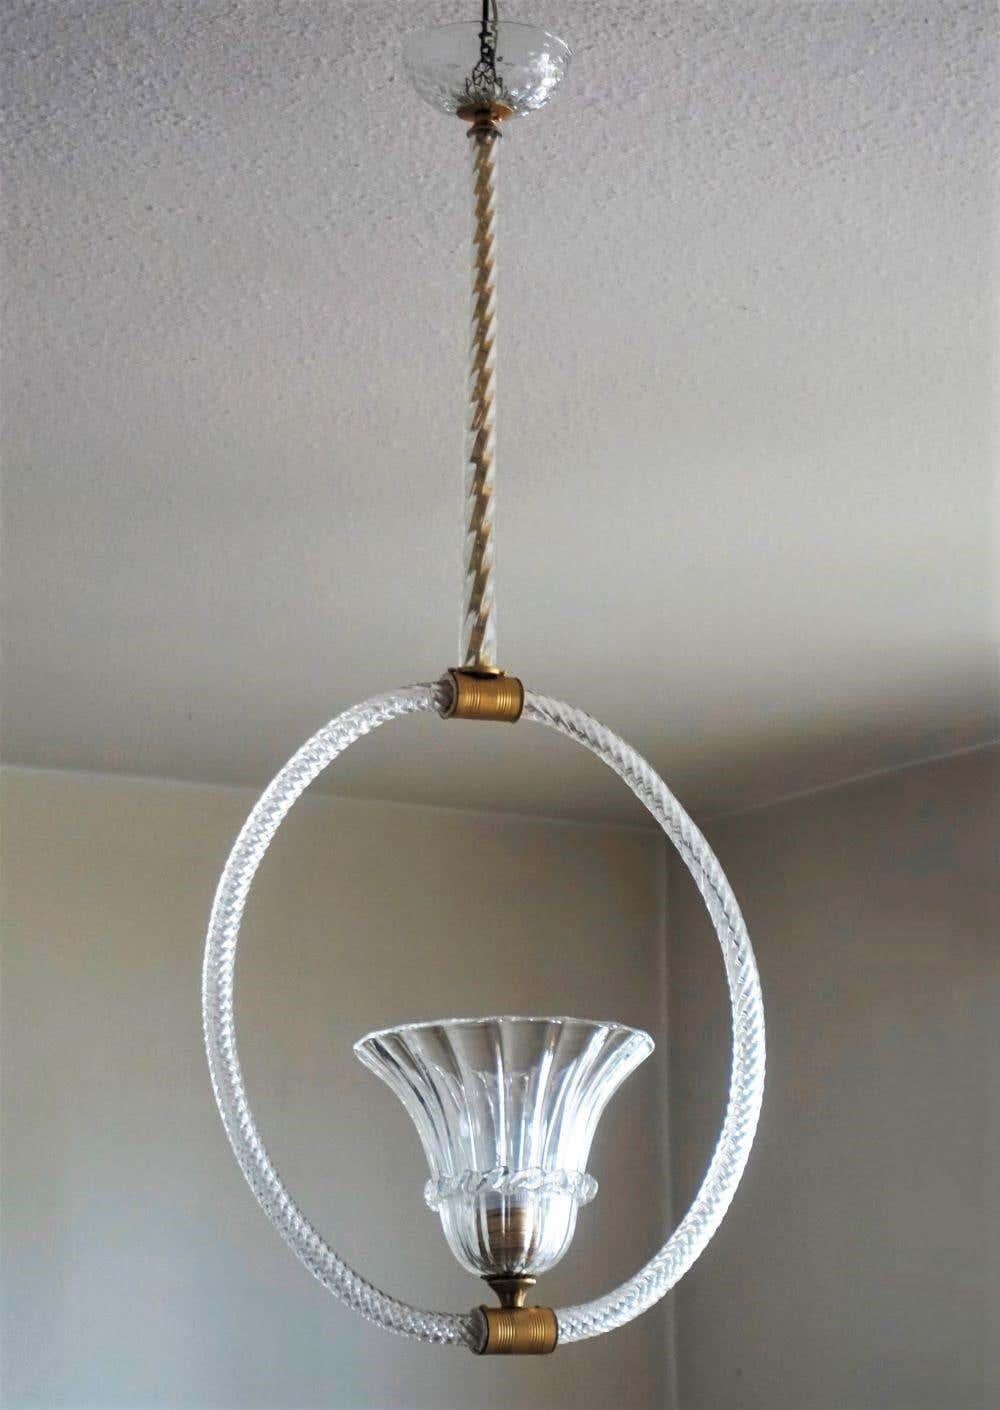 Italian Art Deco Murano Glass Chandelier by Ercole Barovier, Italy, 1930s For Sale